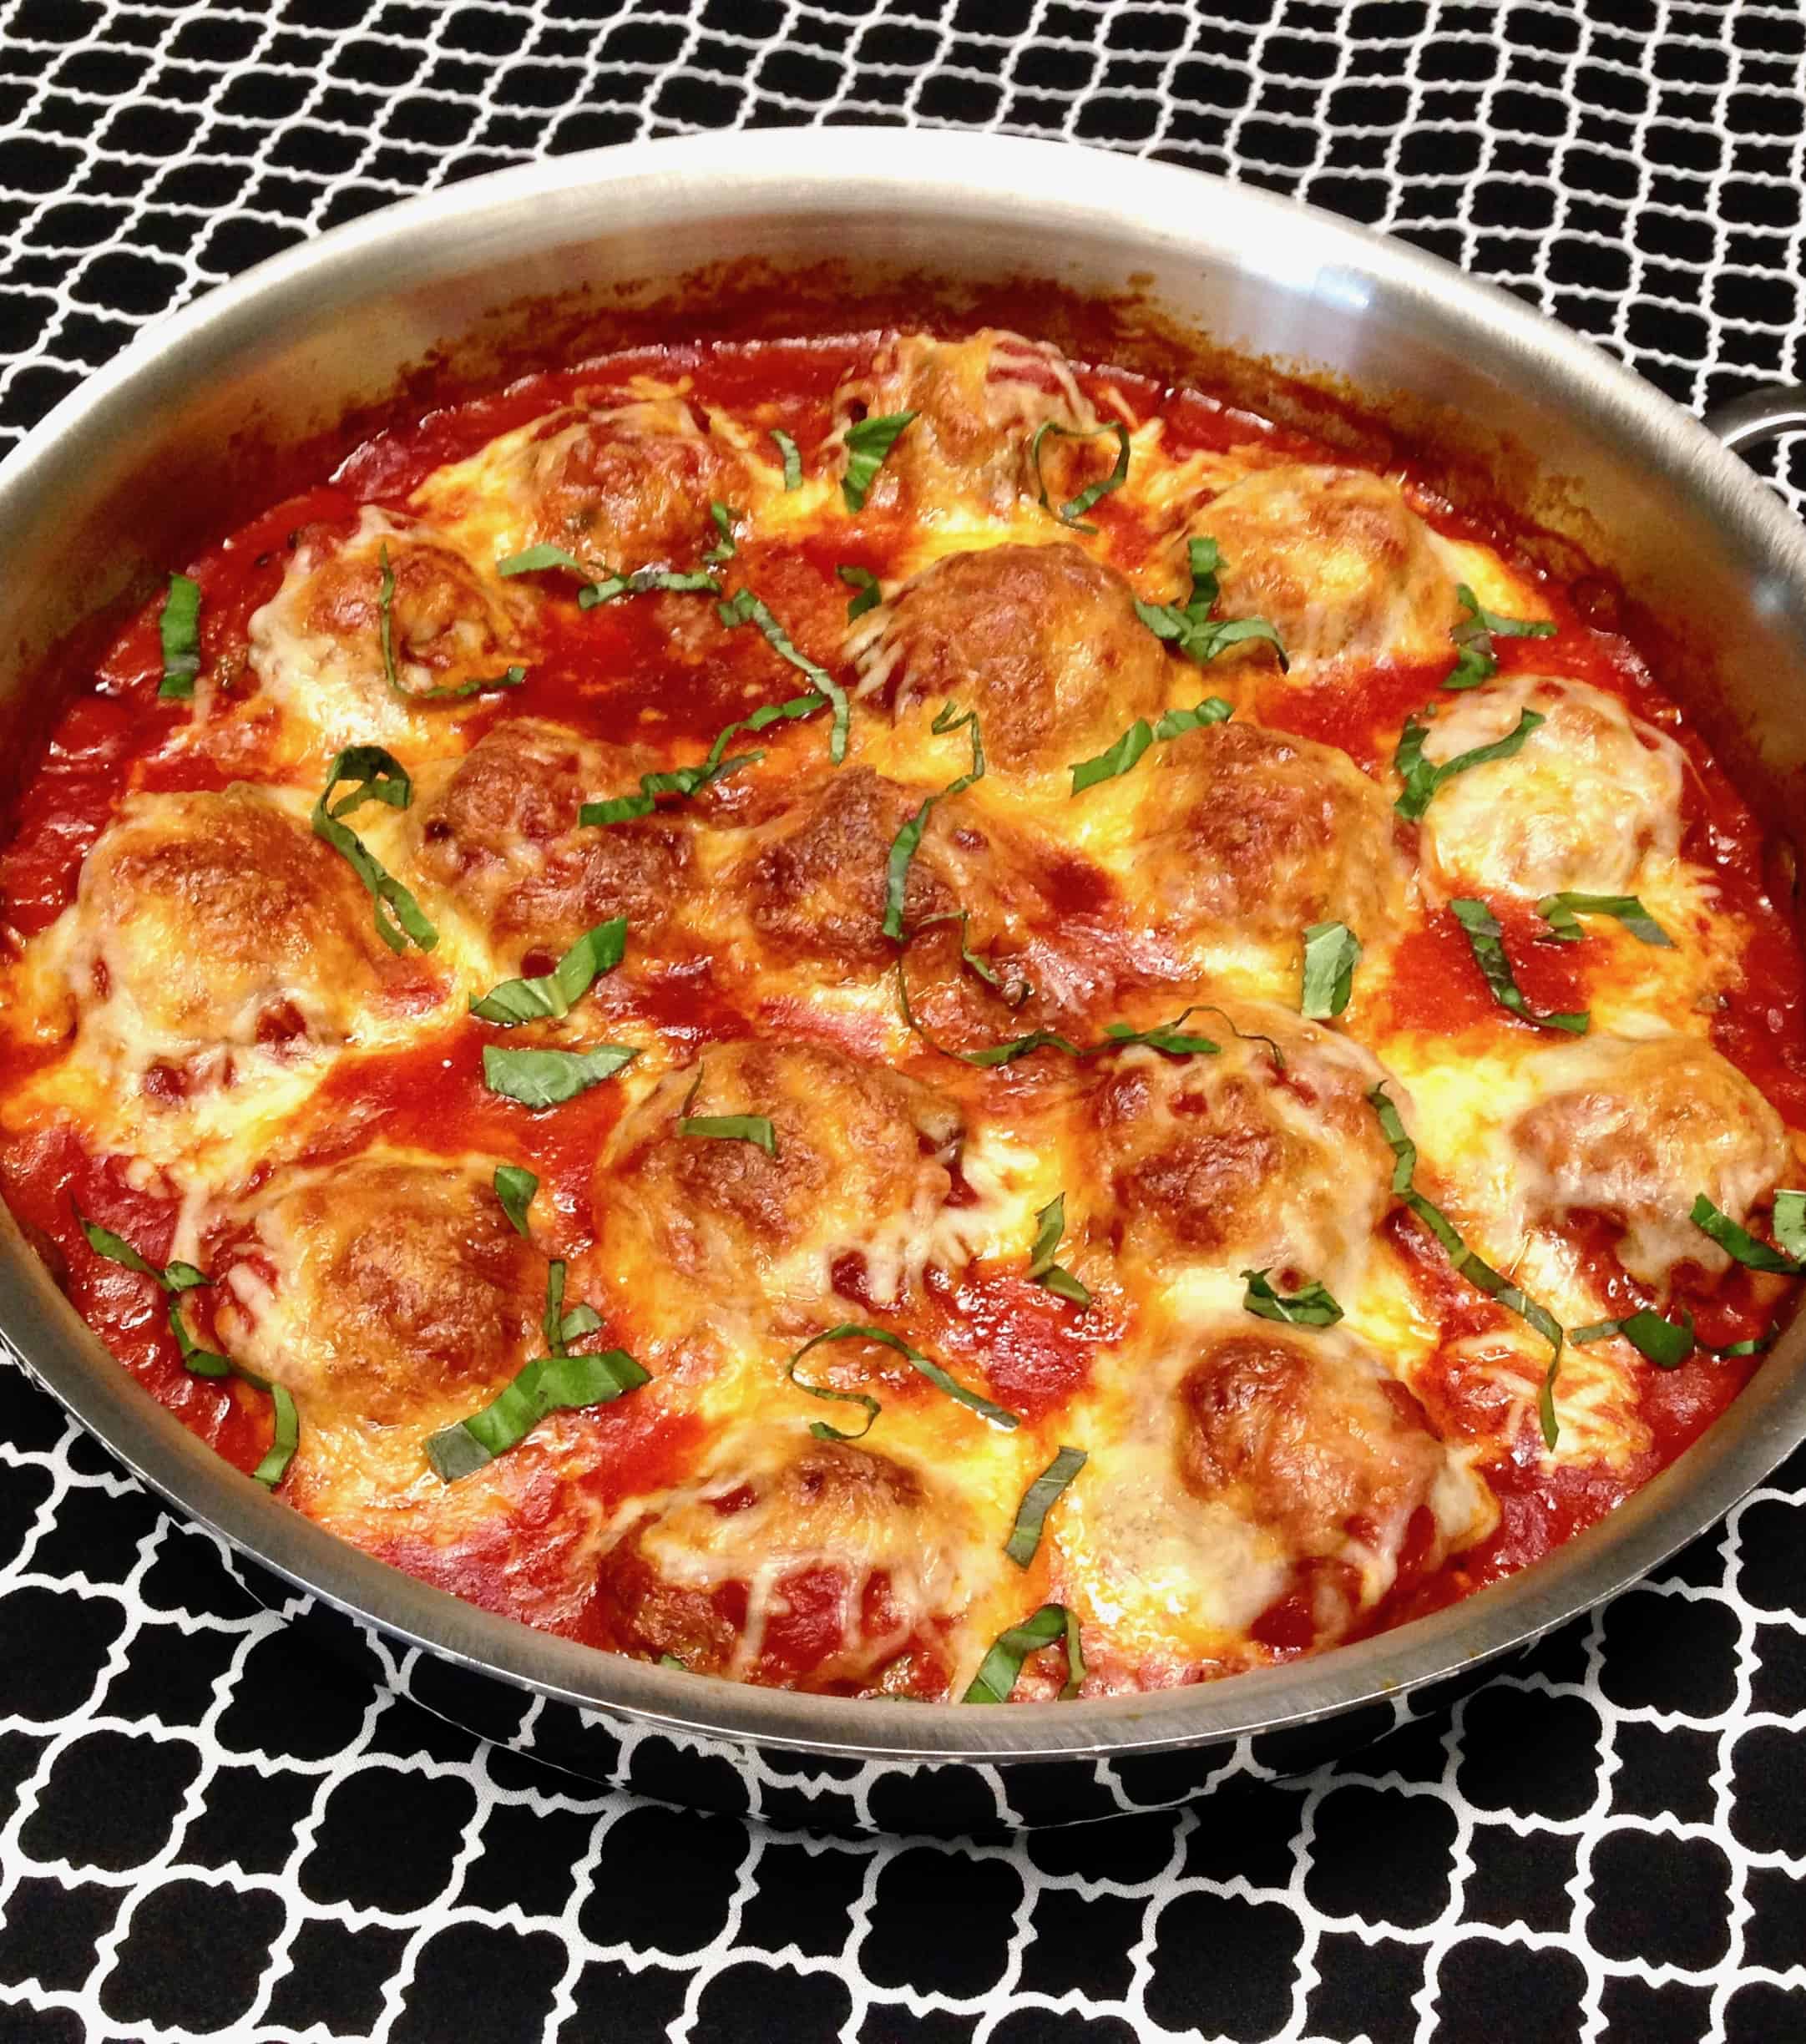 pan of baked meatballs with cheese and basil on top